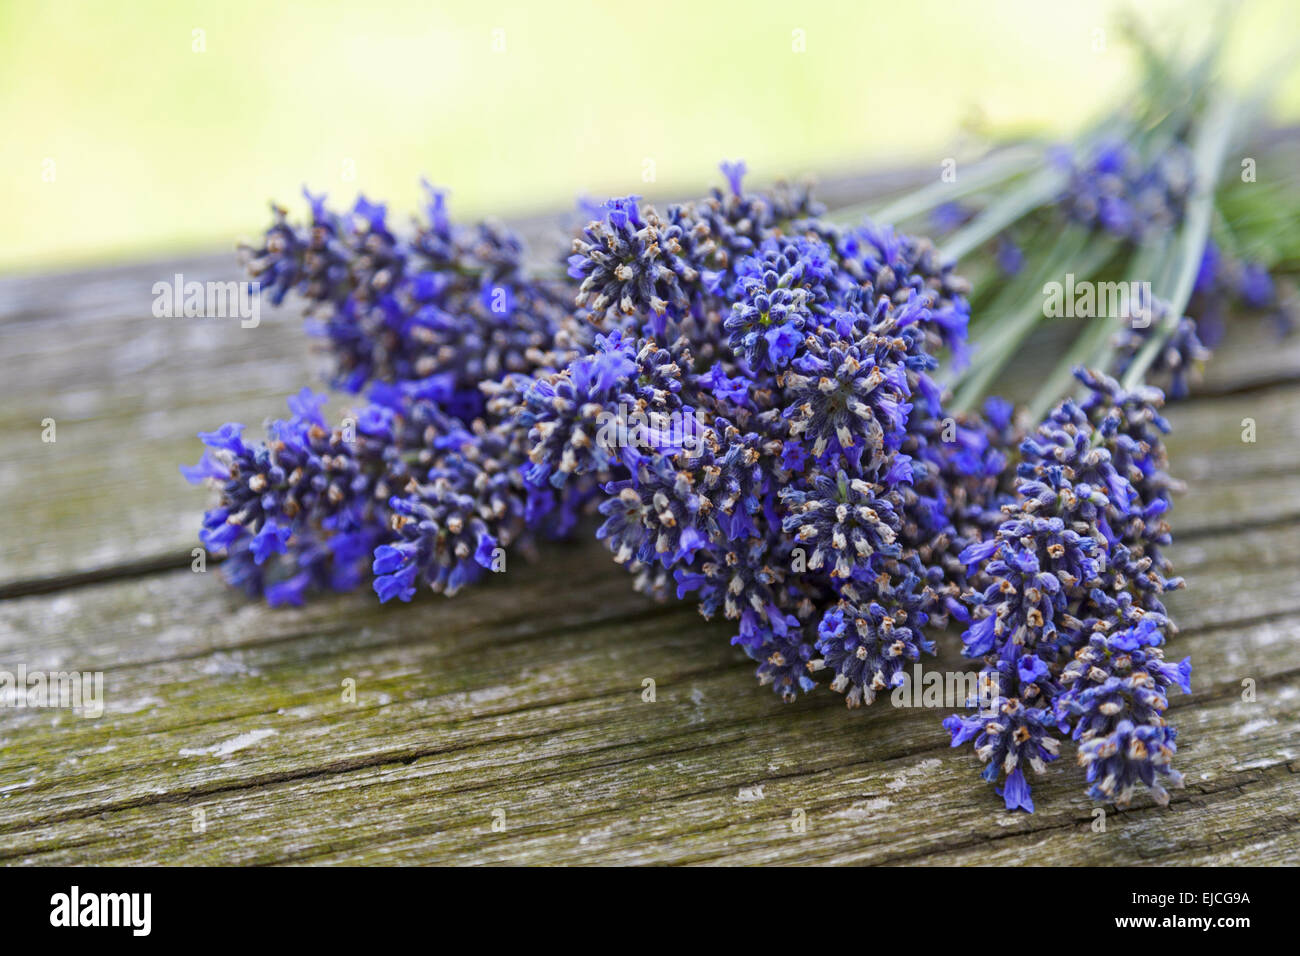 Lavender on old wood Stock Photo